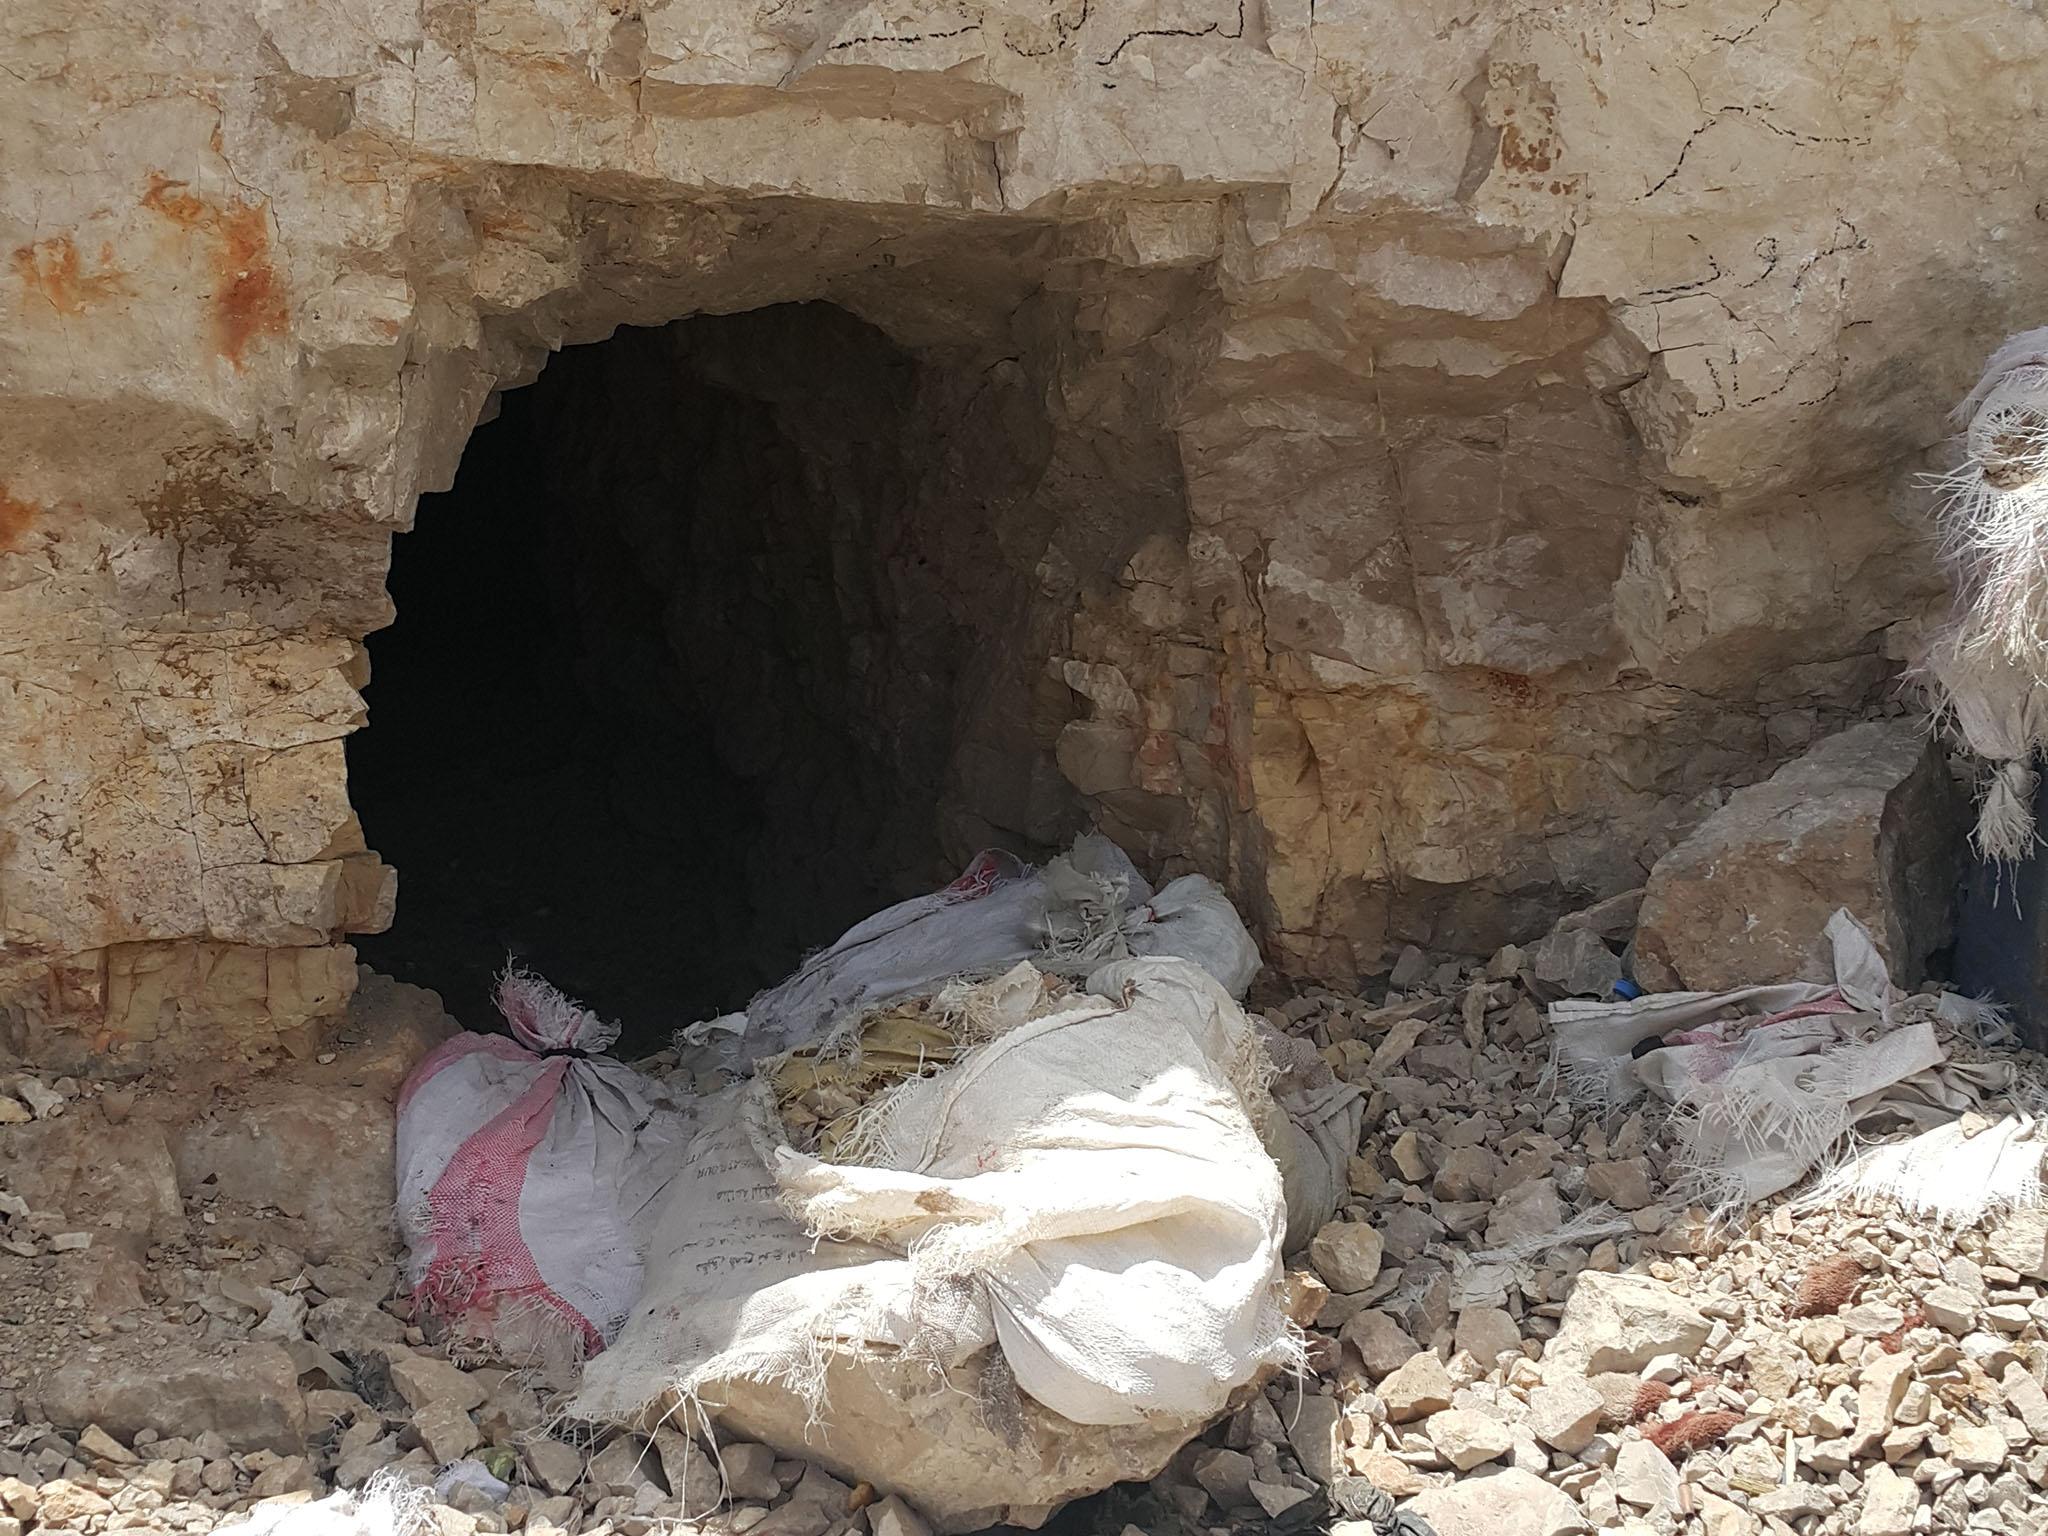 Isis dug deep tunnels into the living rock to defend their mountain fortress